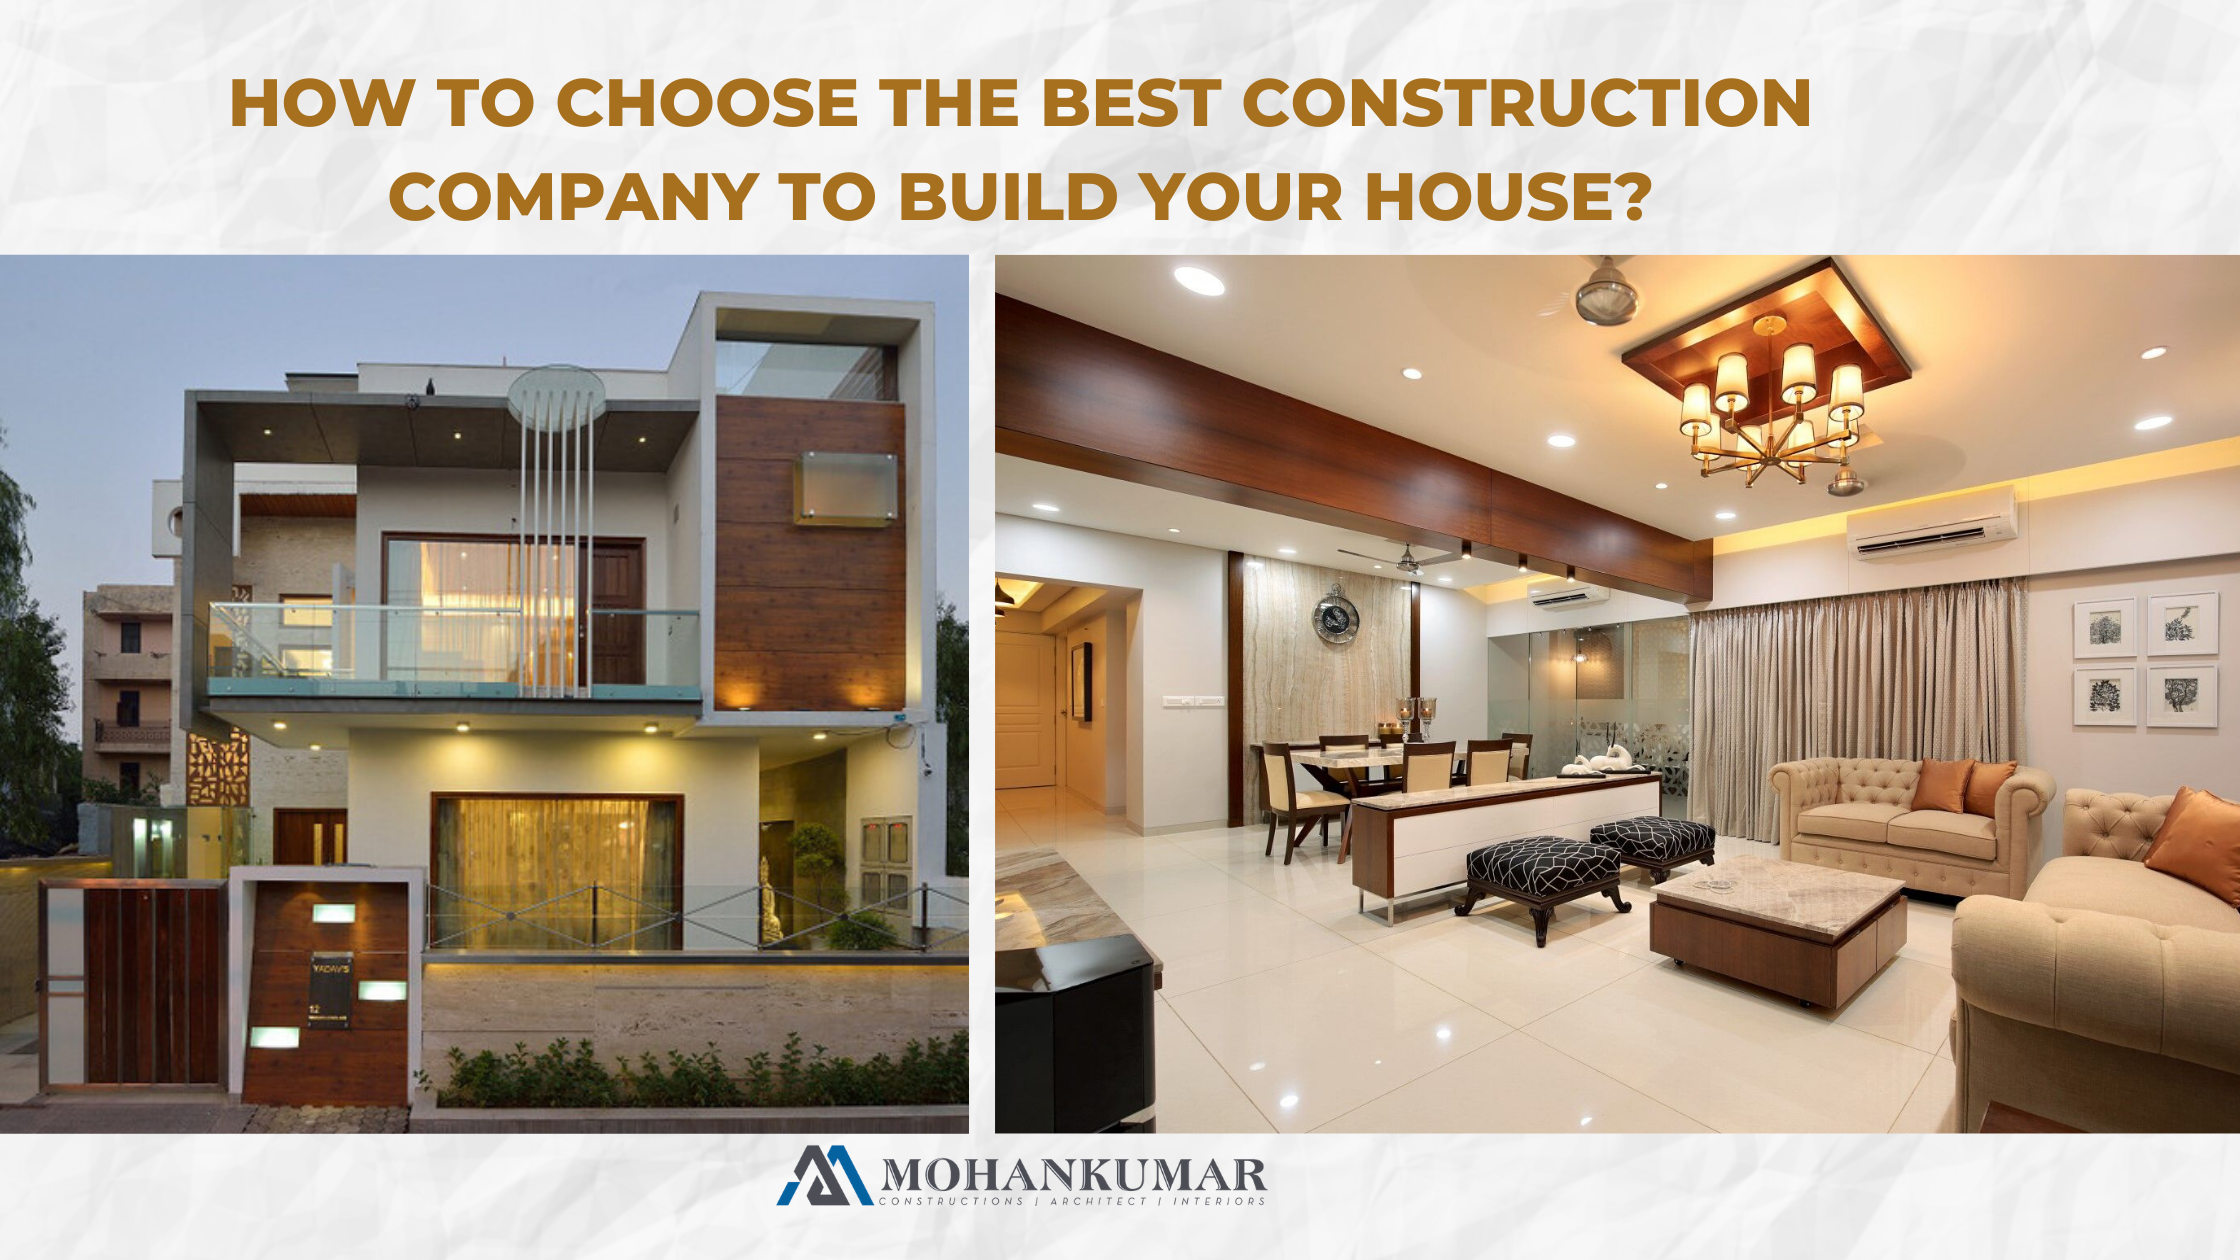 The best civil construction company in Chennai